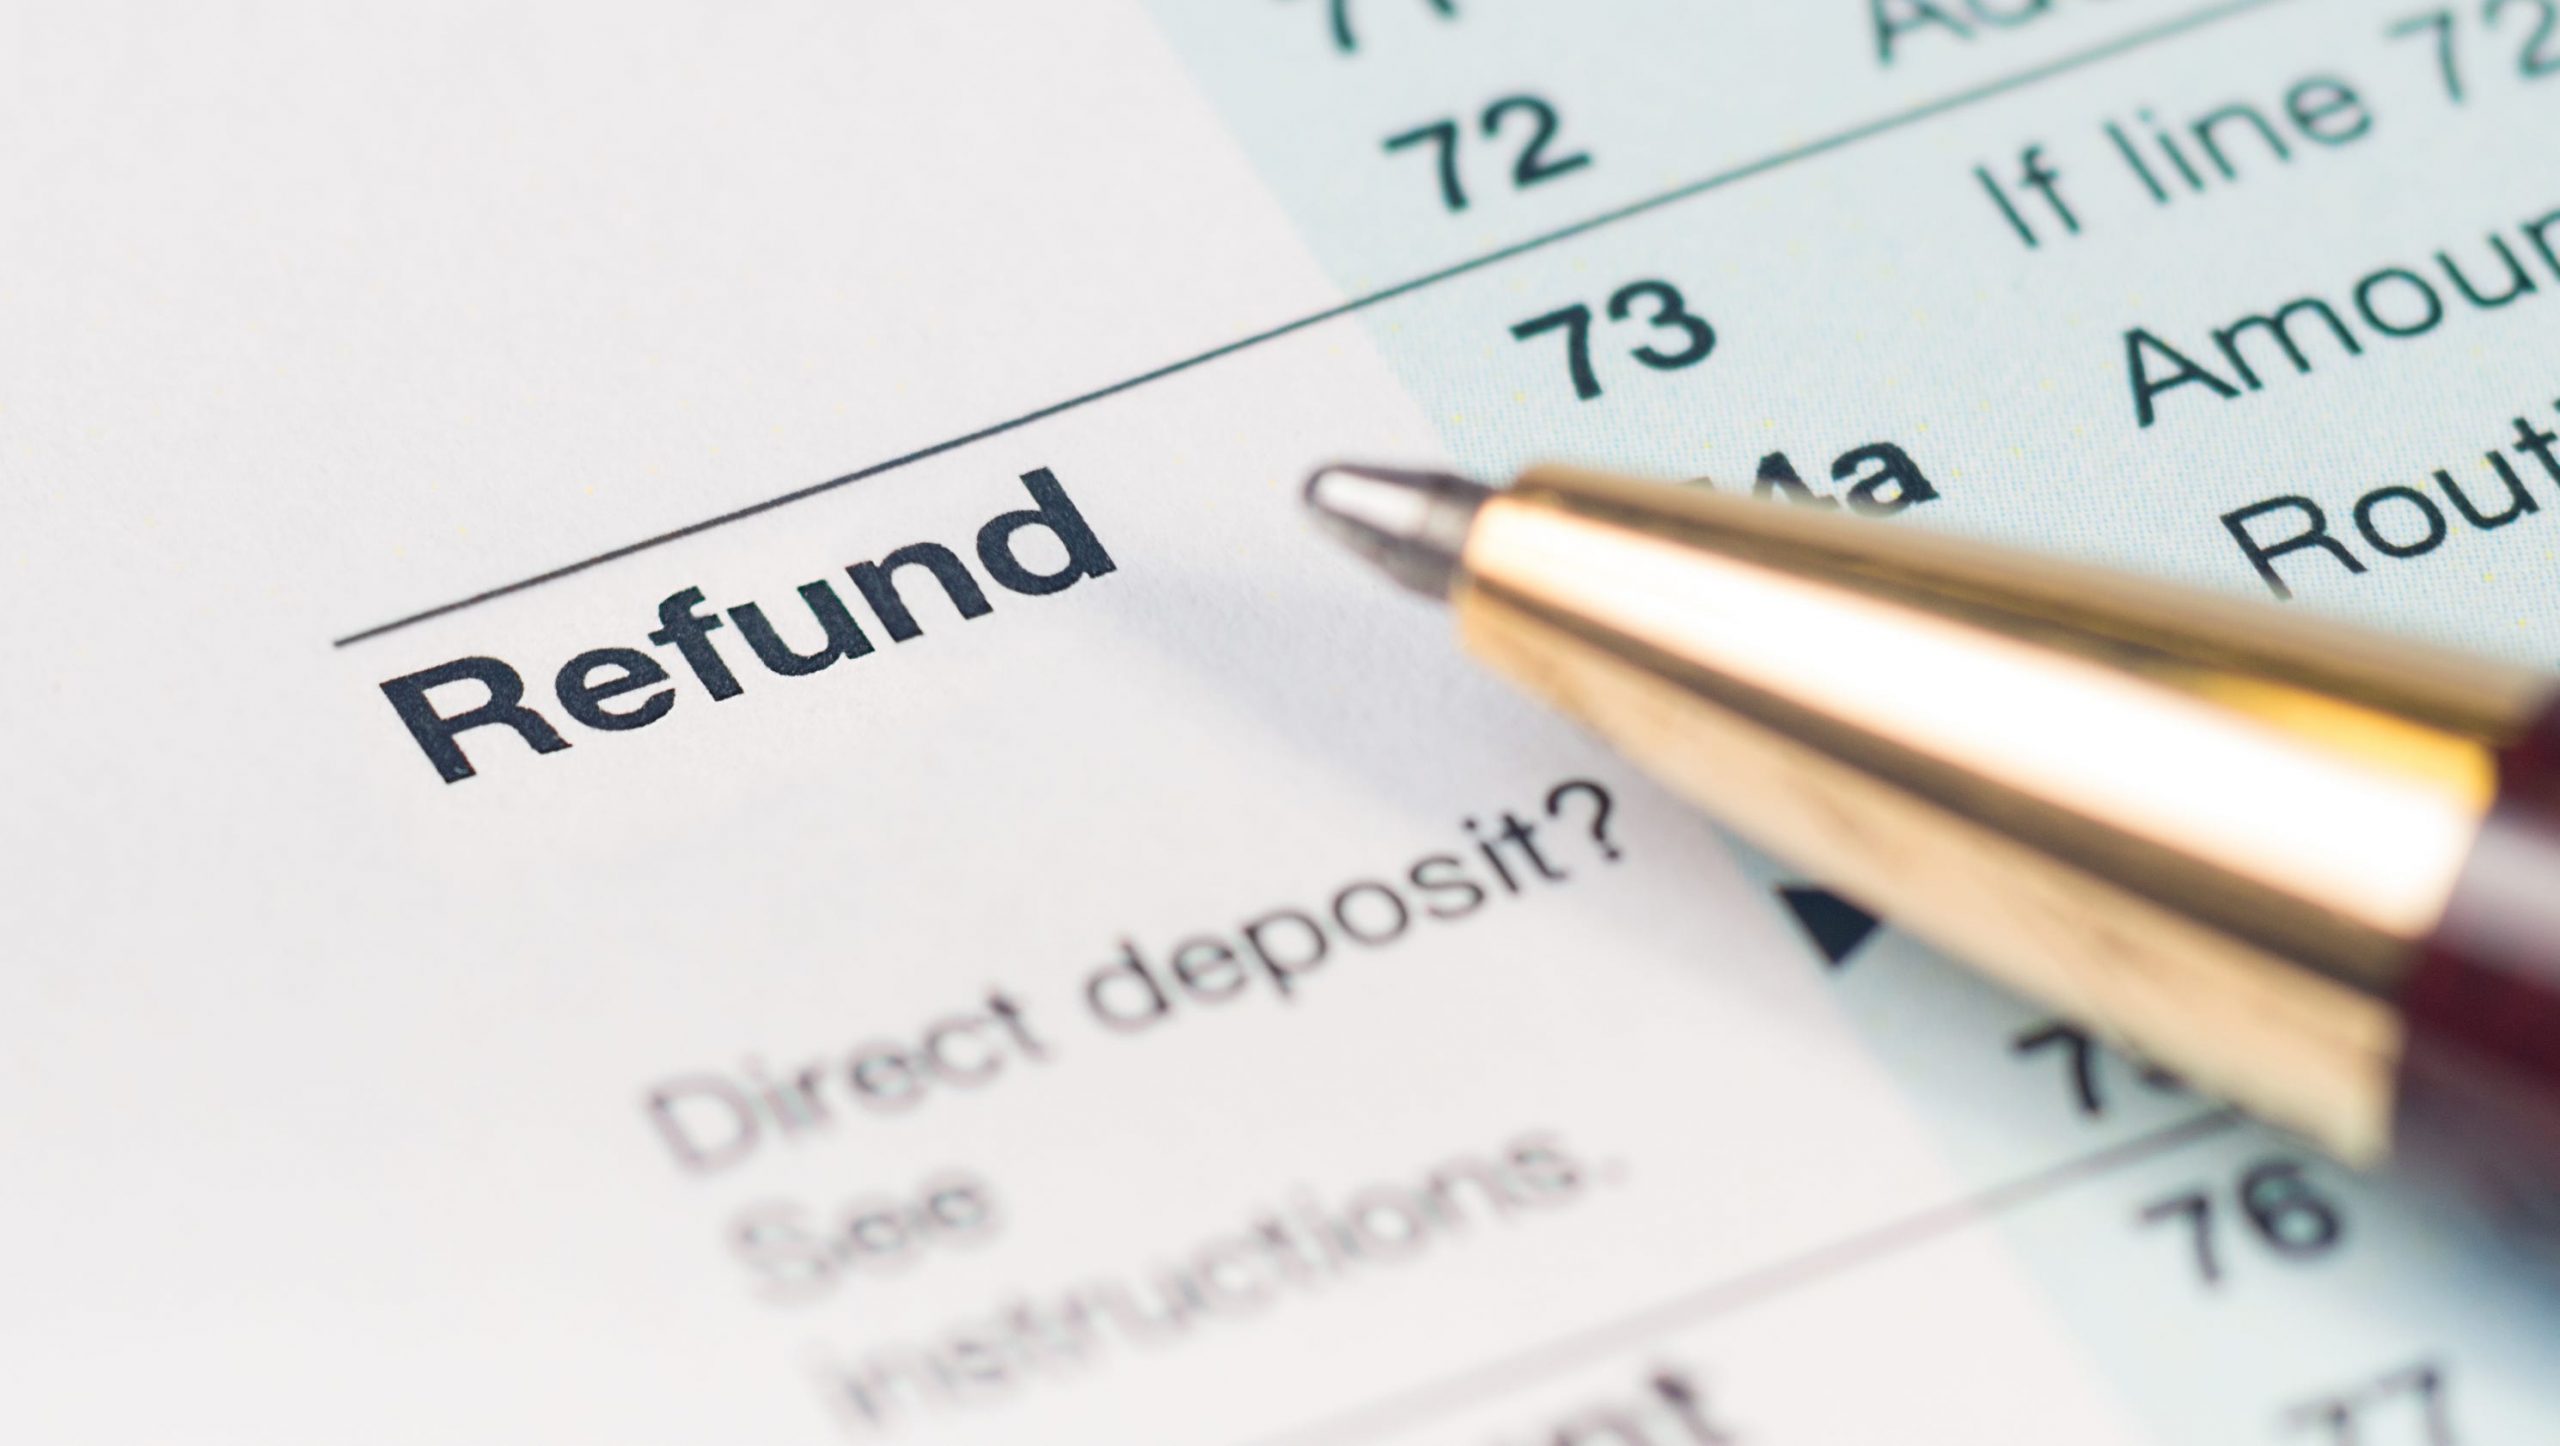 Get the most out of tax refund with these tips